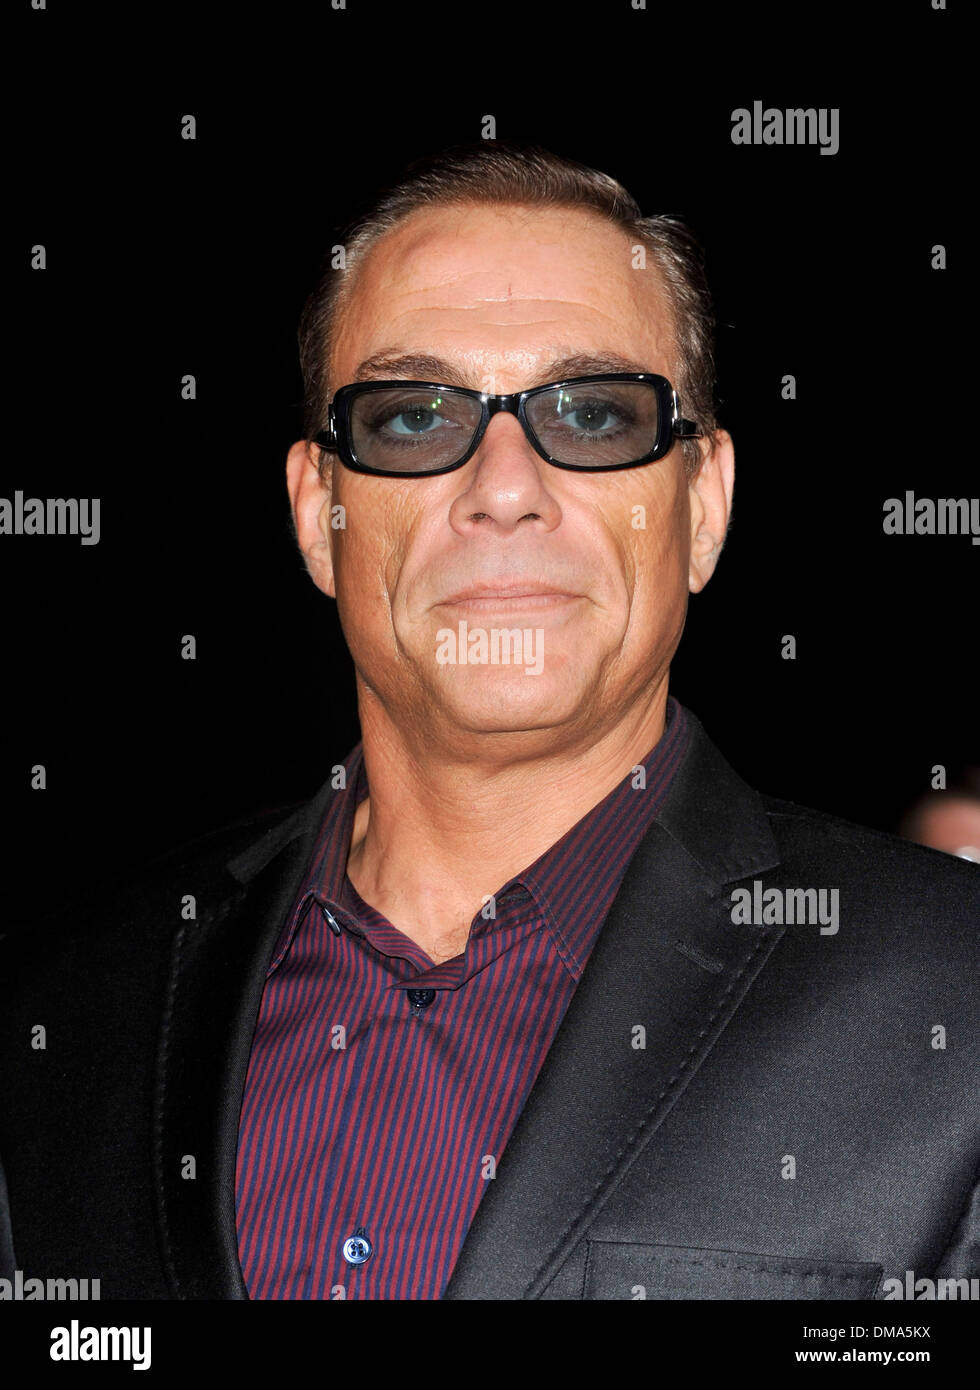 Jean Claude Van Damme Los Angeles Premiere of Expendables 2 at Grauman’s Chinese Theatre Hollywood California - 15.08.12 Stock Photo